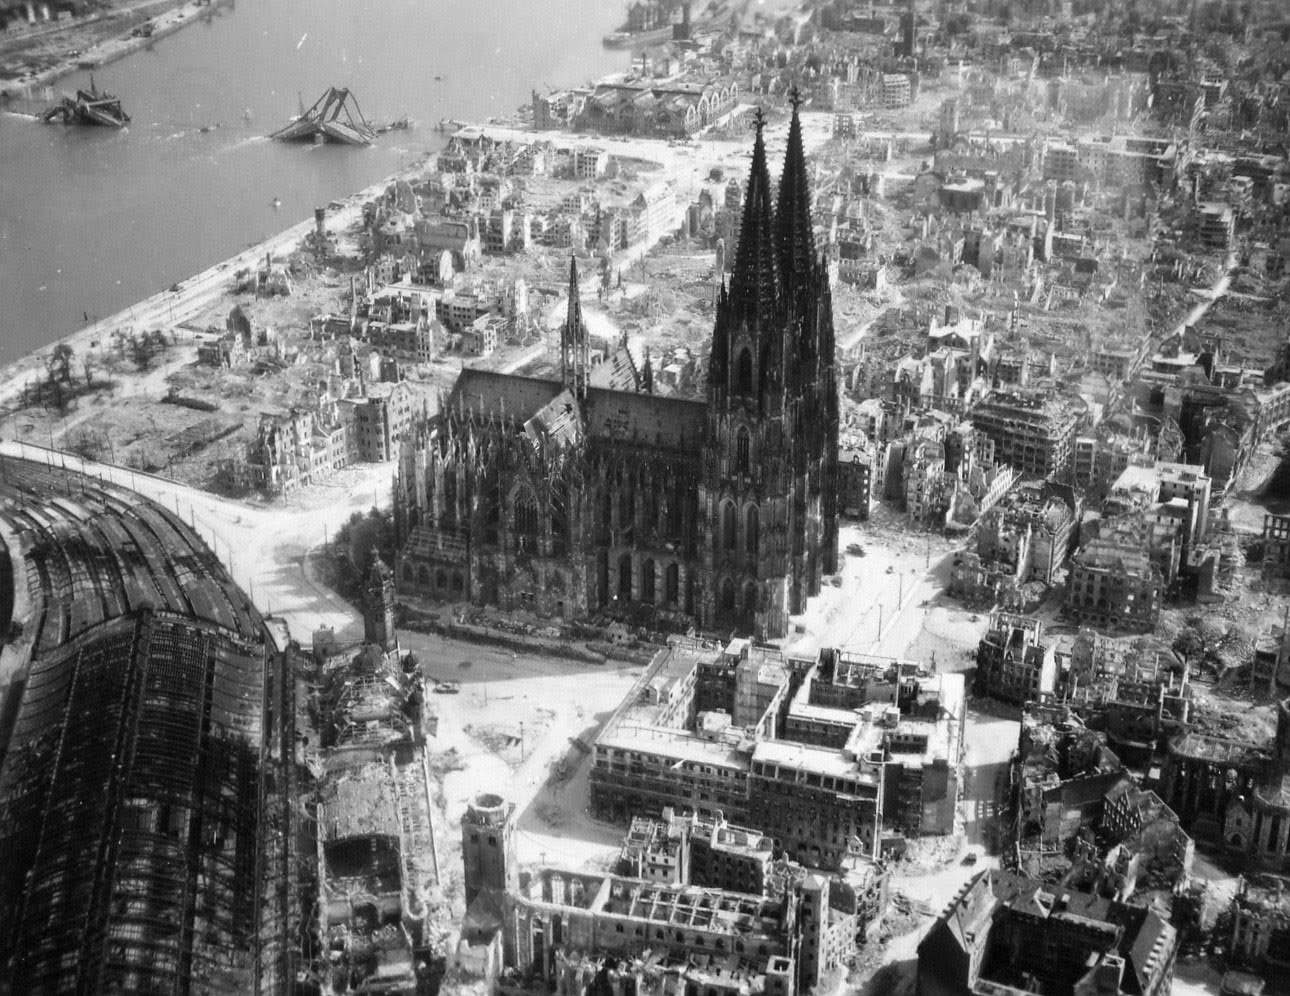 The-Cologne-Cathedral-stands-tall-amidst-the-ruins-of-the-city-after-allied-bombings,-1944-(1).jpg